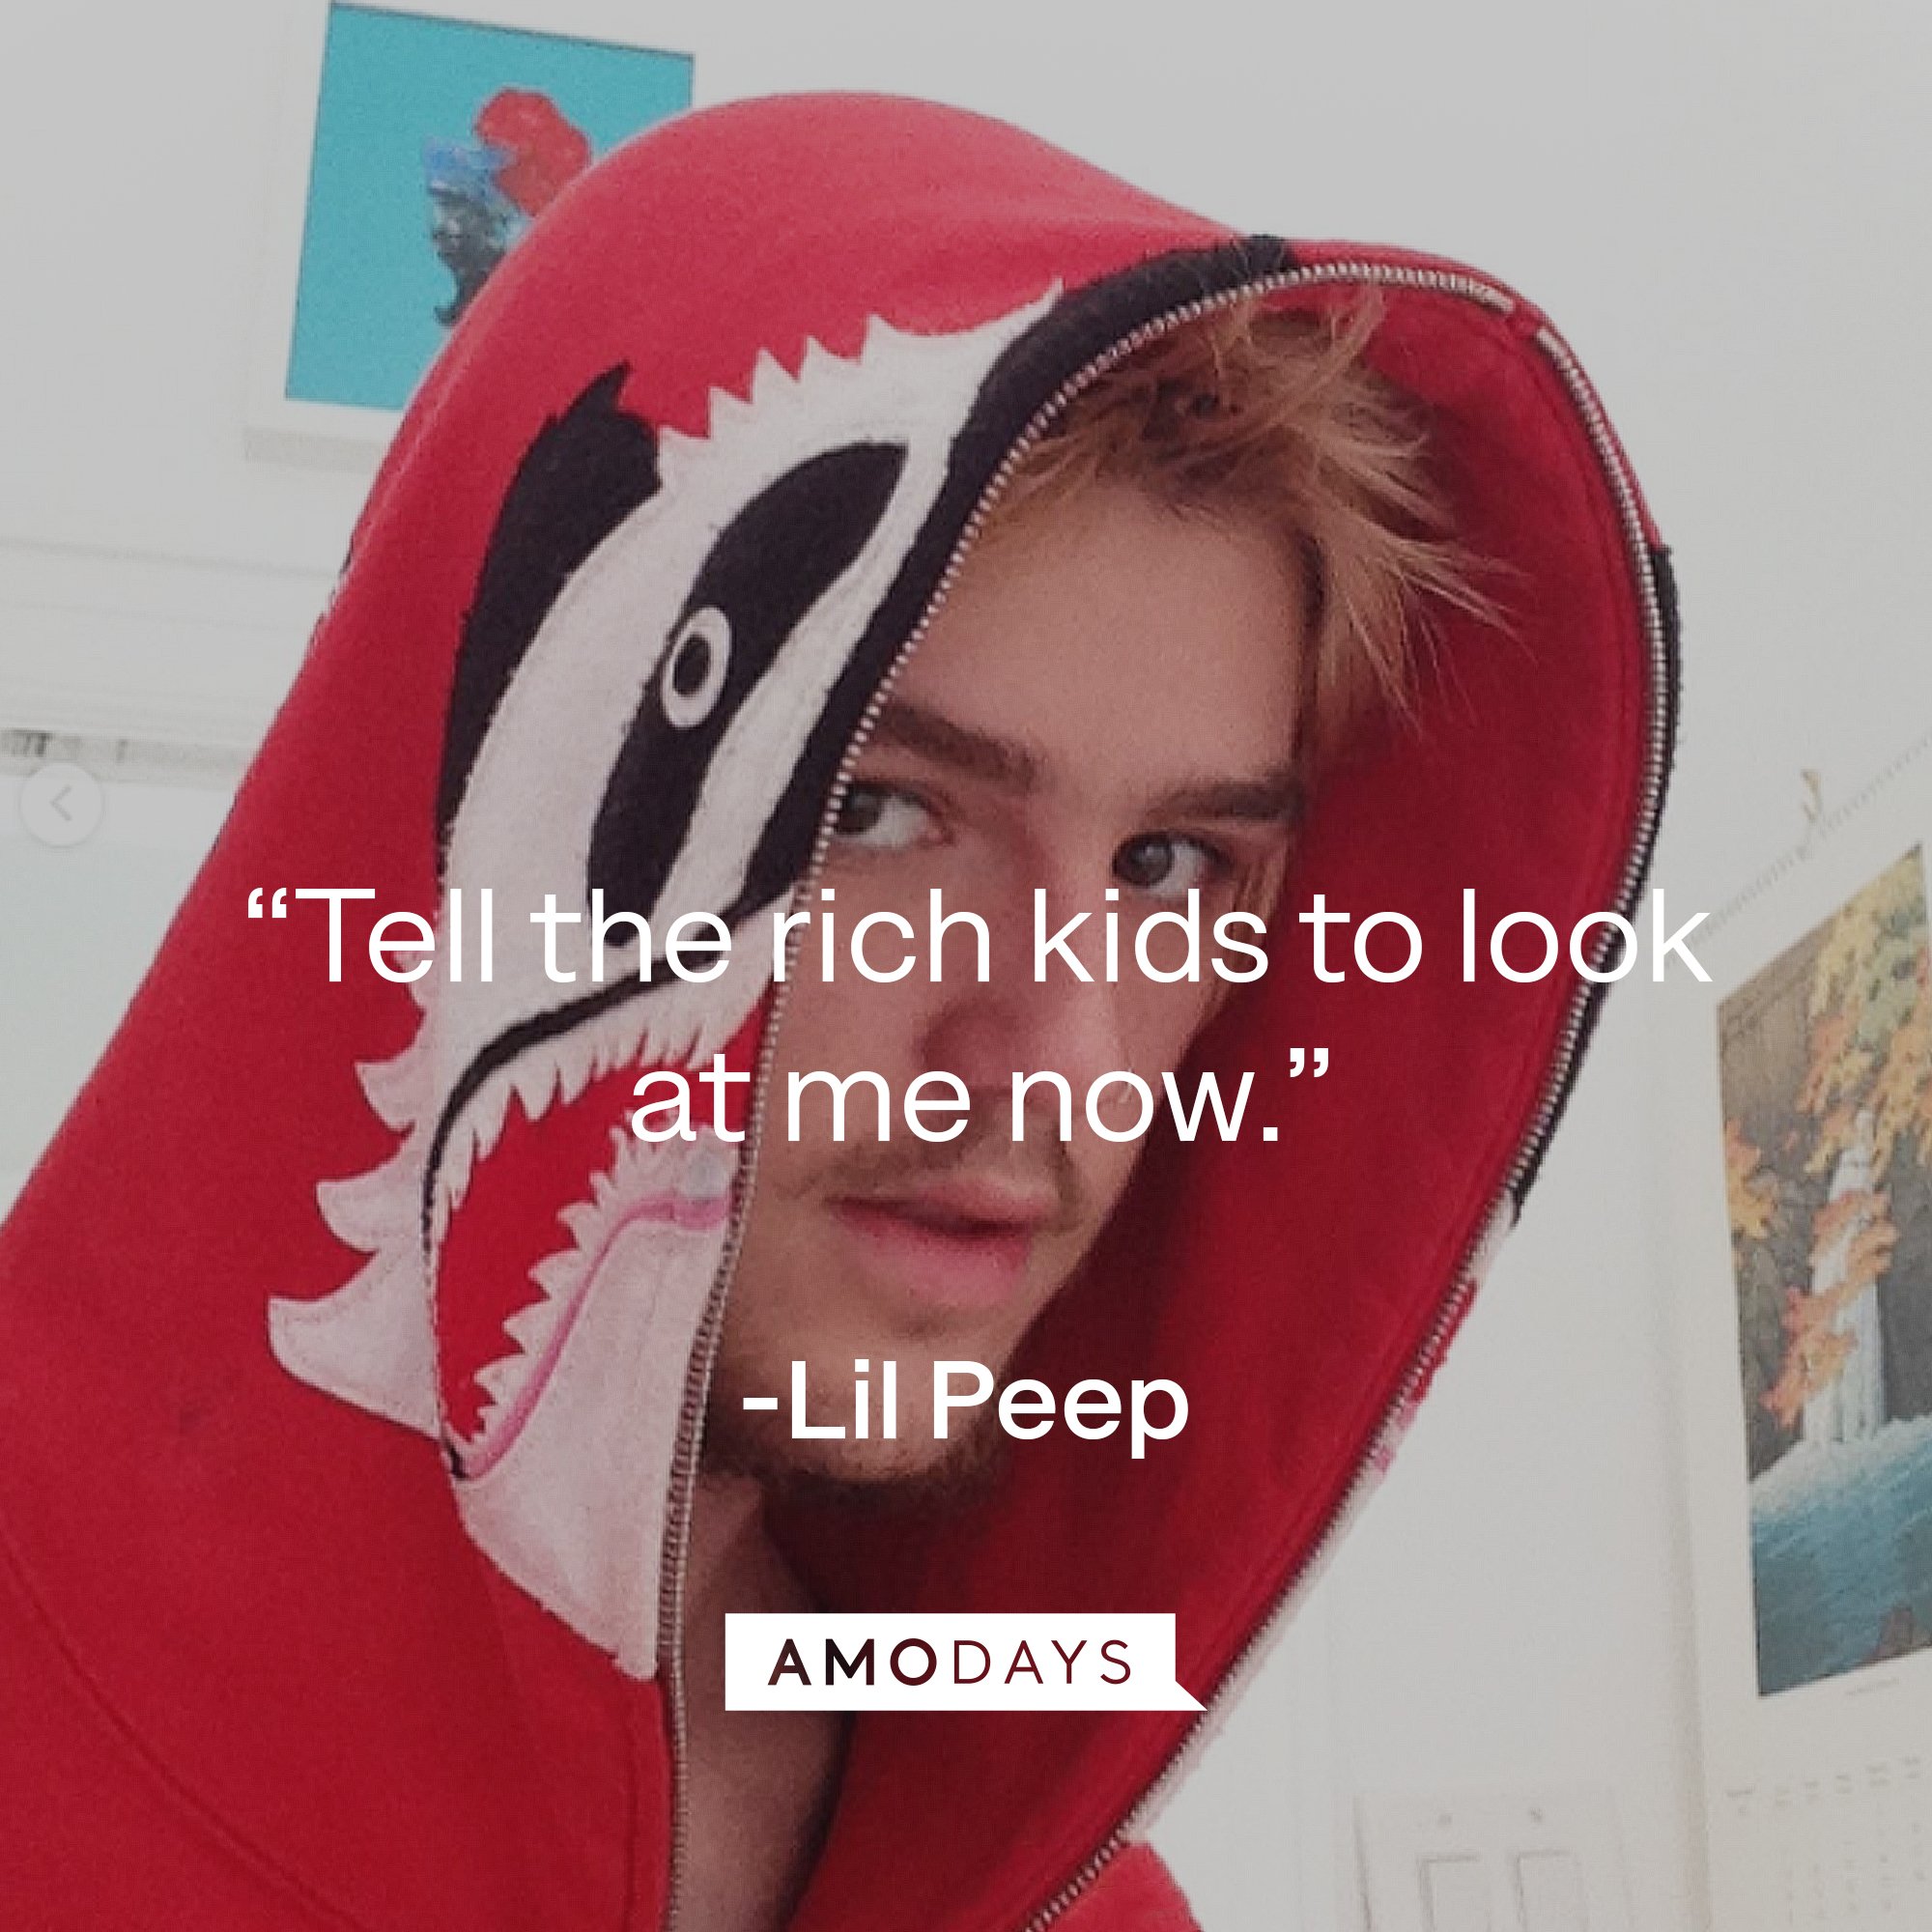 Lil Peep's quote: “Tell the rich kids to look at me now.” | Image: AmoDays